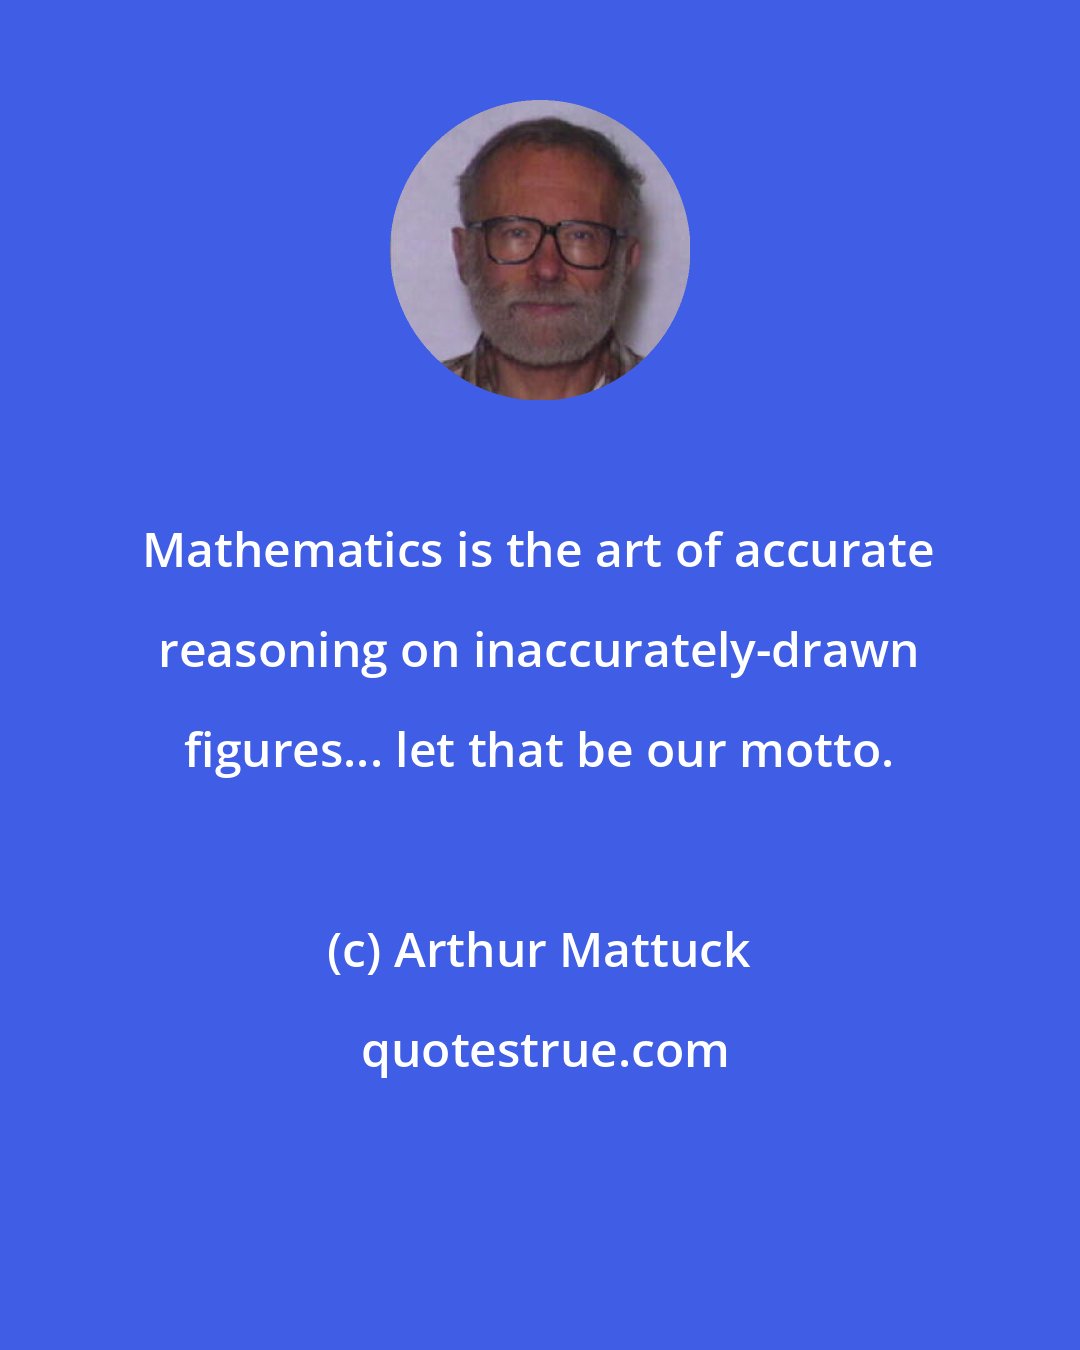 Arthur Mattuck: Mathematics is the art of accurate reasoning on inaccurately-drawn figures... let that be our motto.